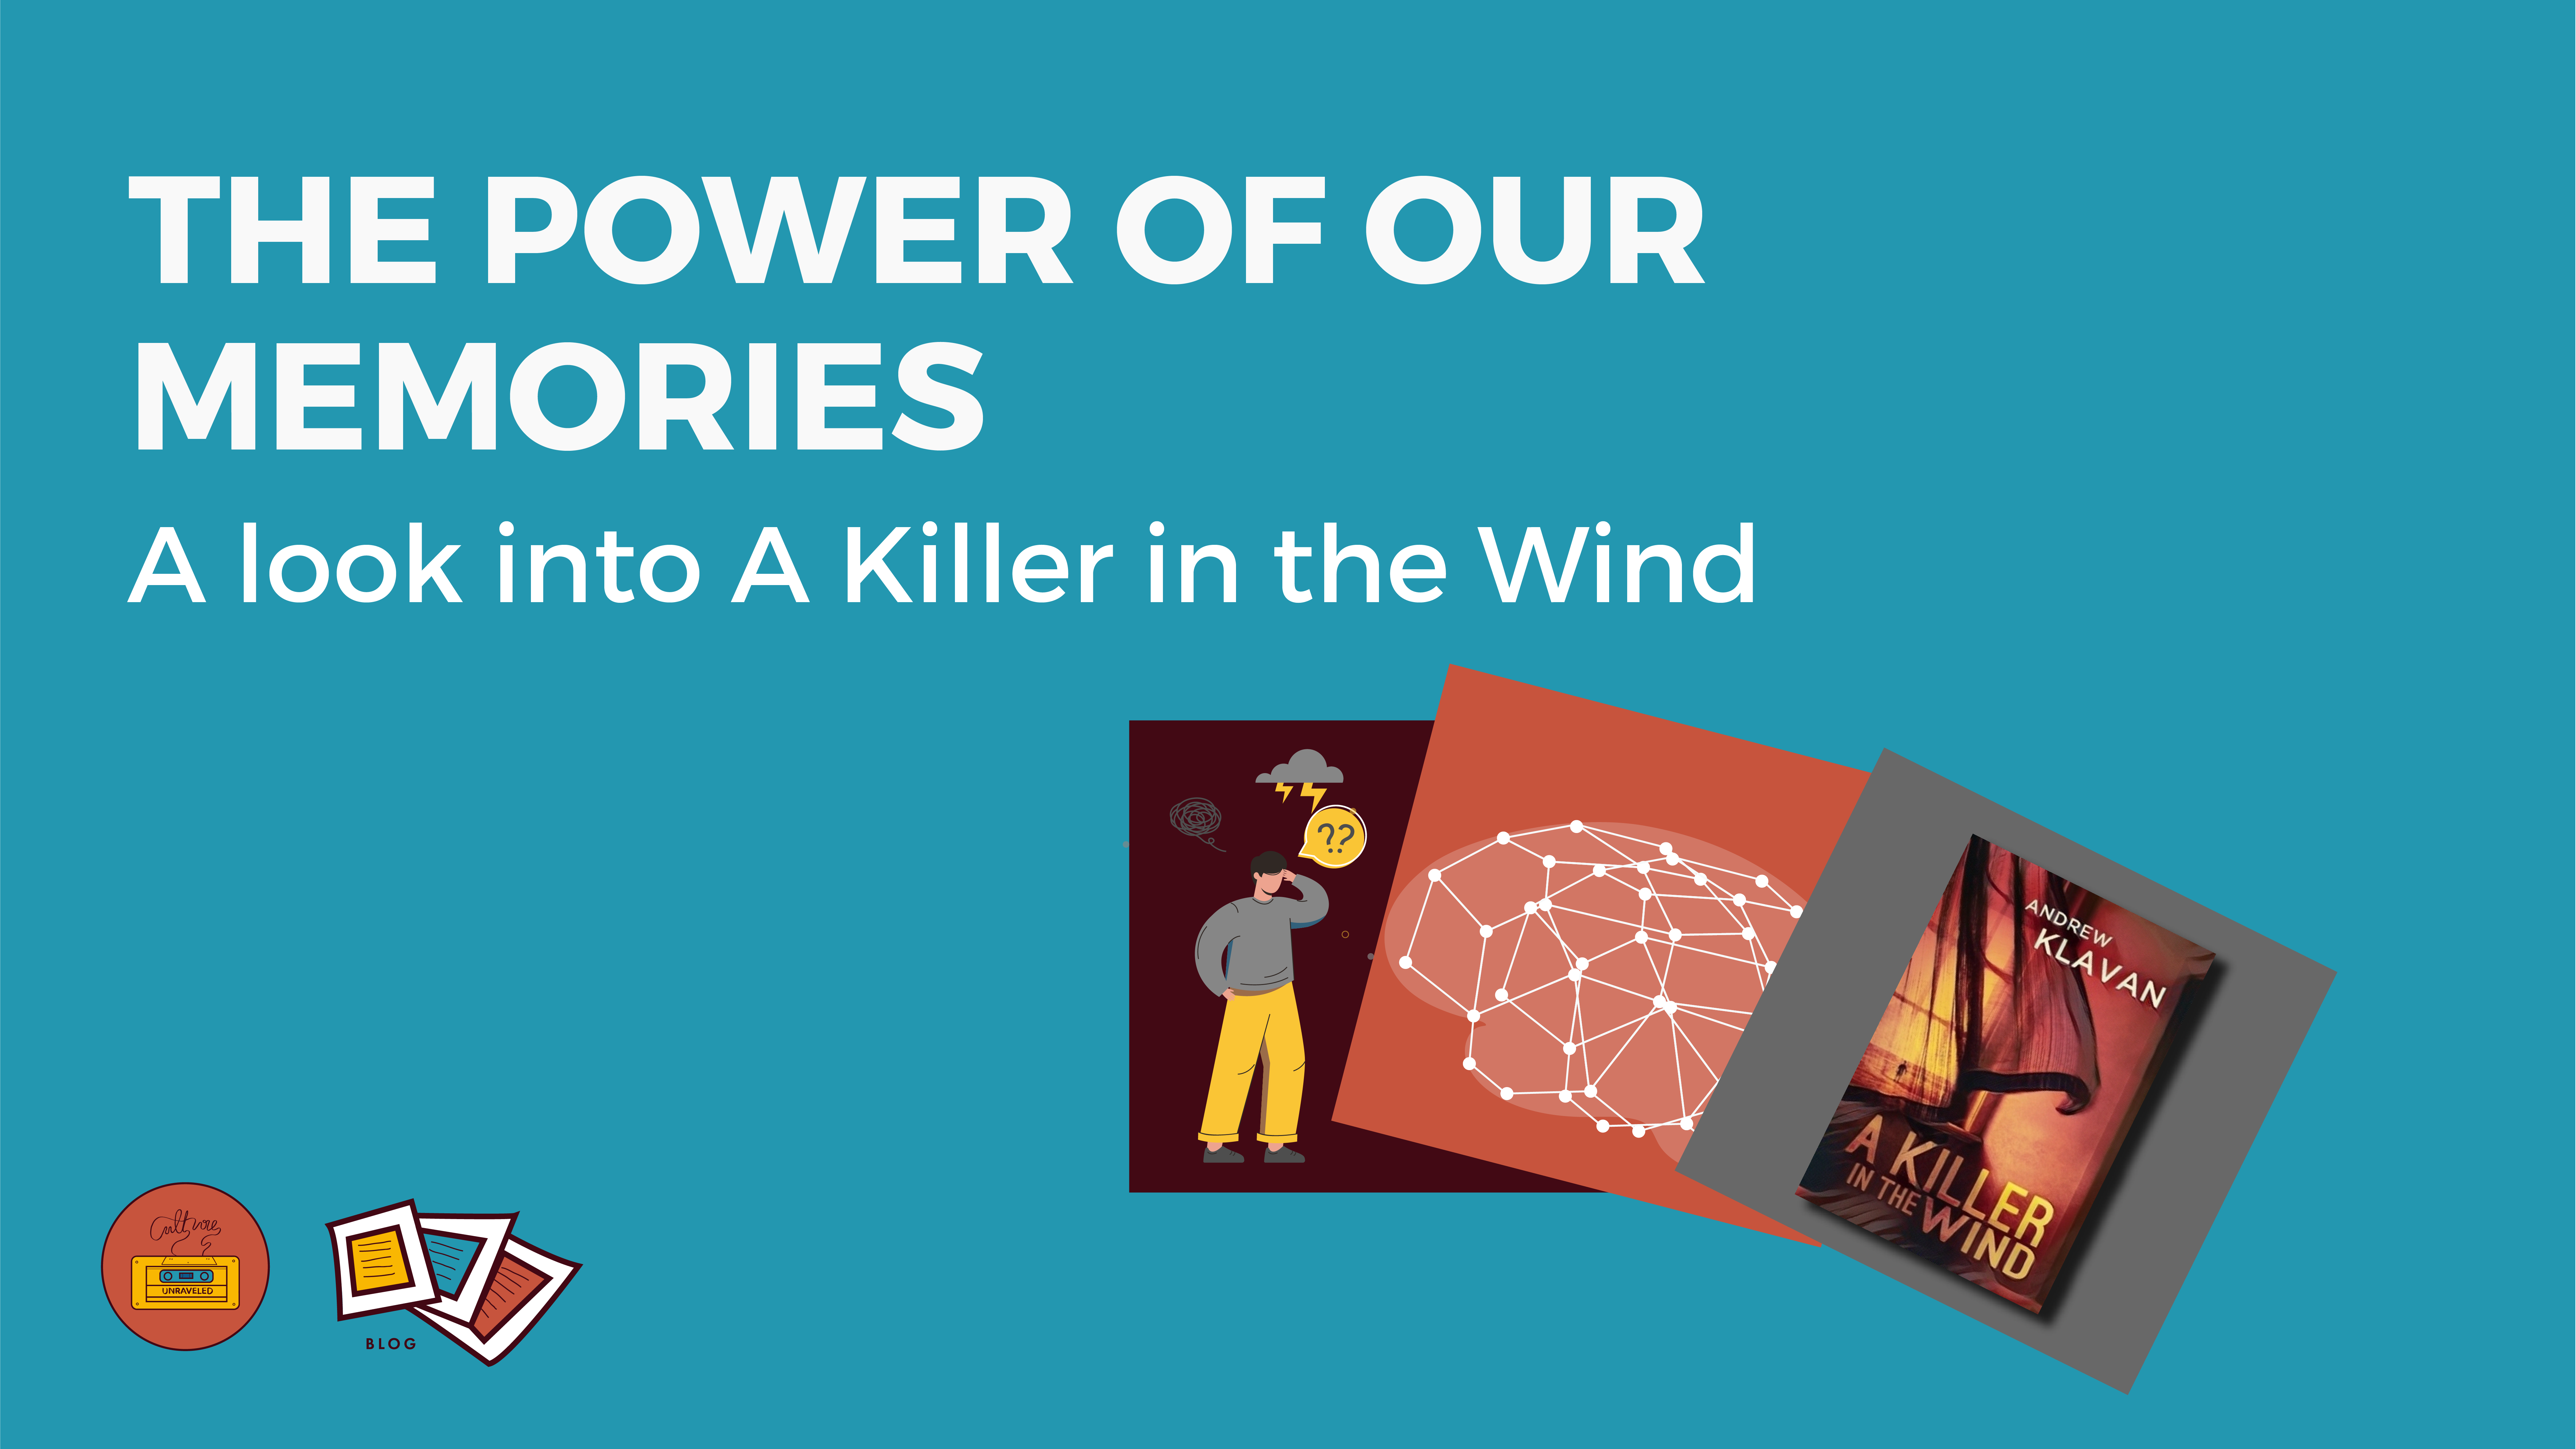 The Power of our Memories. A Look into A Killer in the Wind